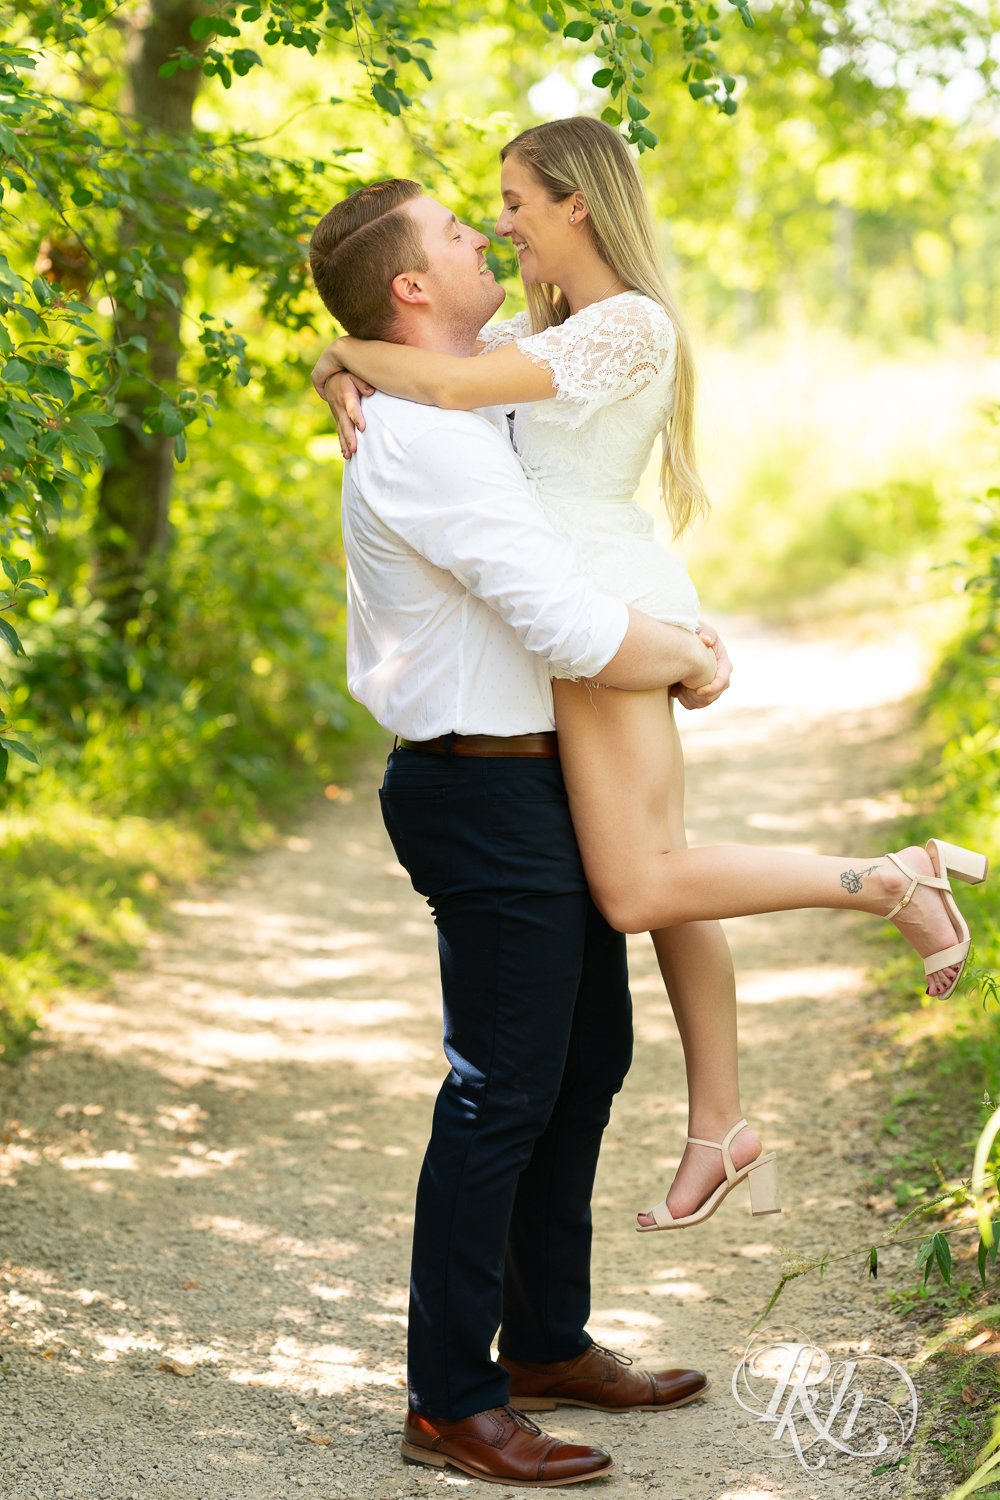 Man lifts woman during summer engagement photography in Minnesota.